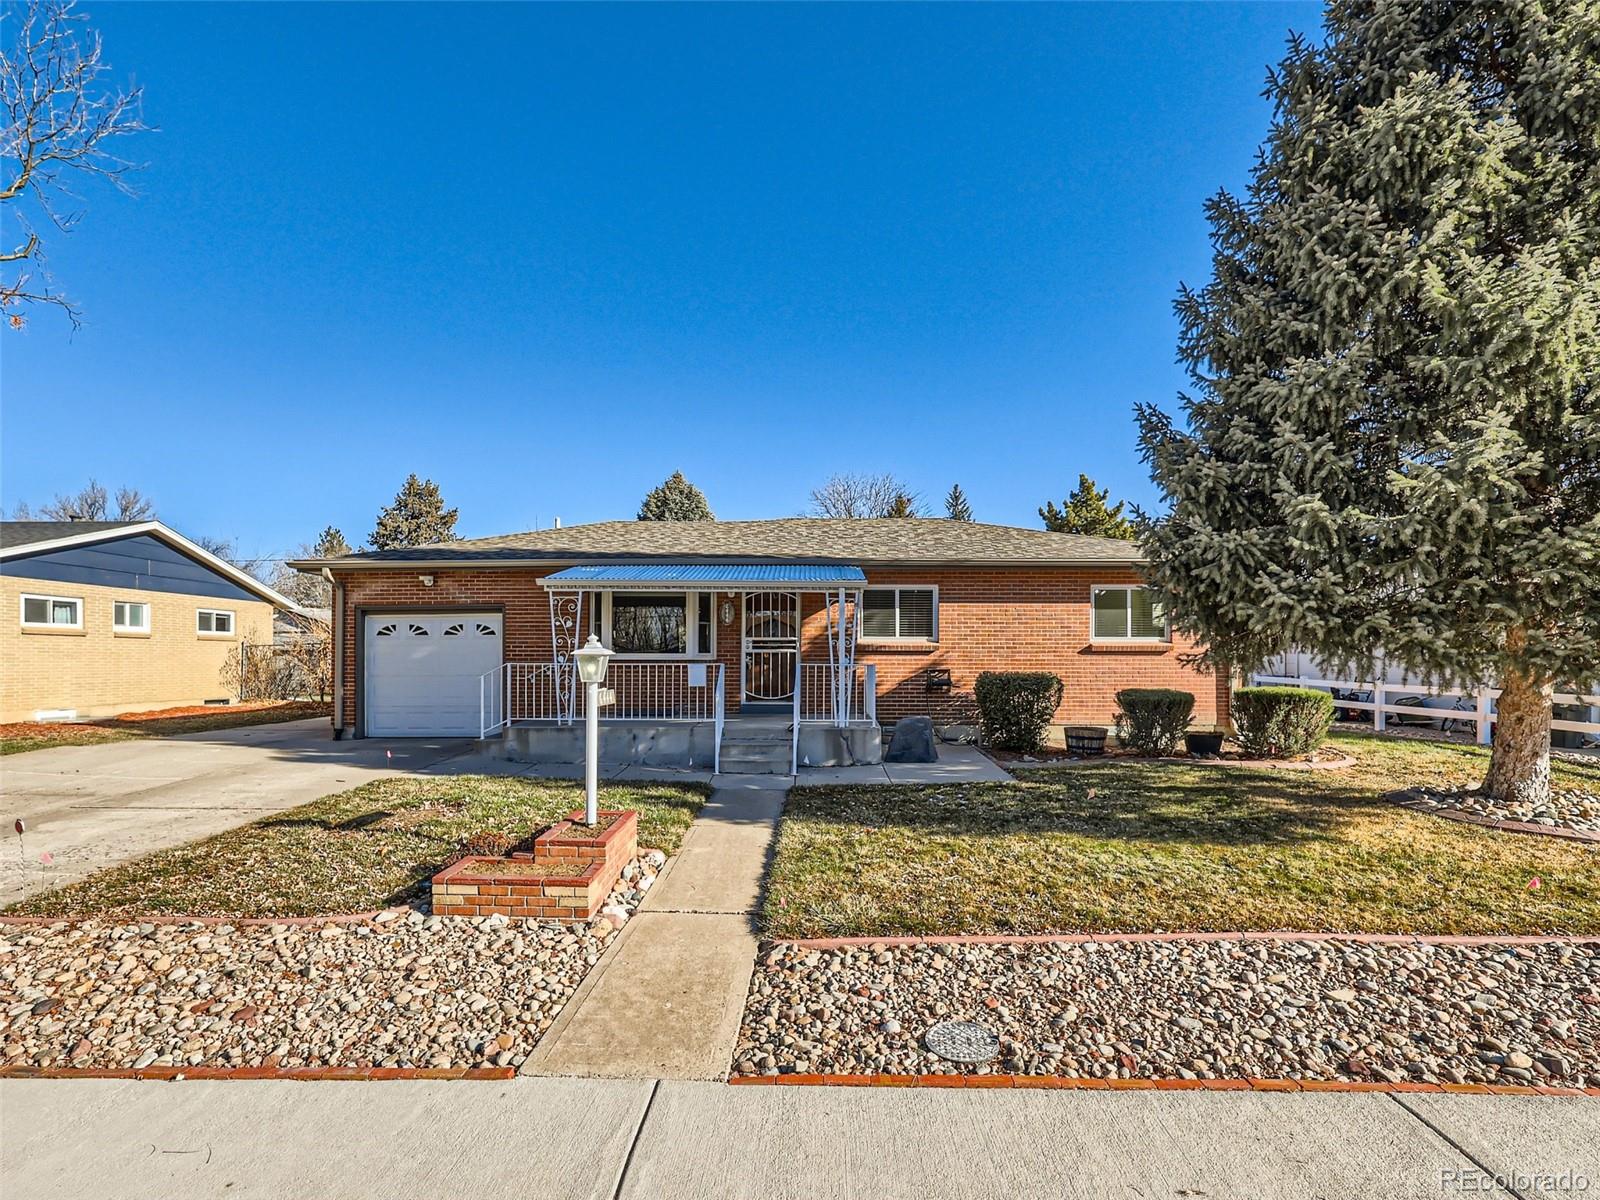 6444  kline street, Arvada sold home. Closed on 2024-02-28 for $545,000.